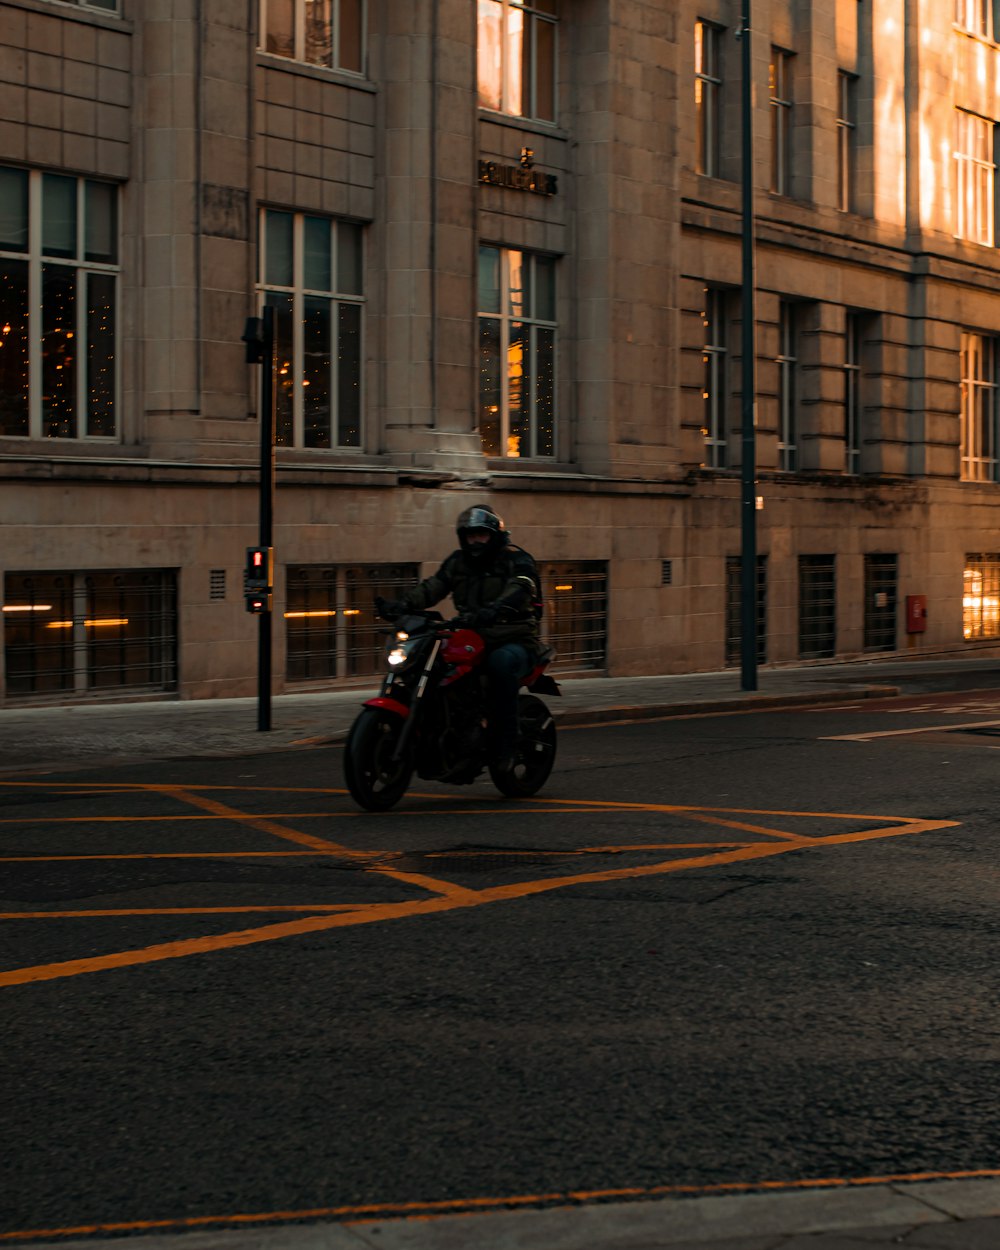 a person riding a motorcycle on the street